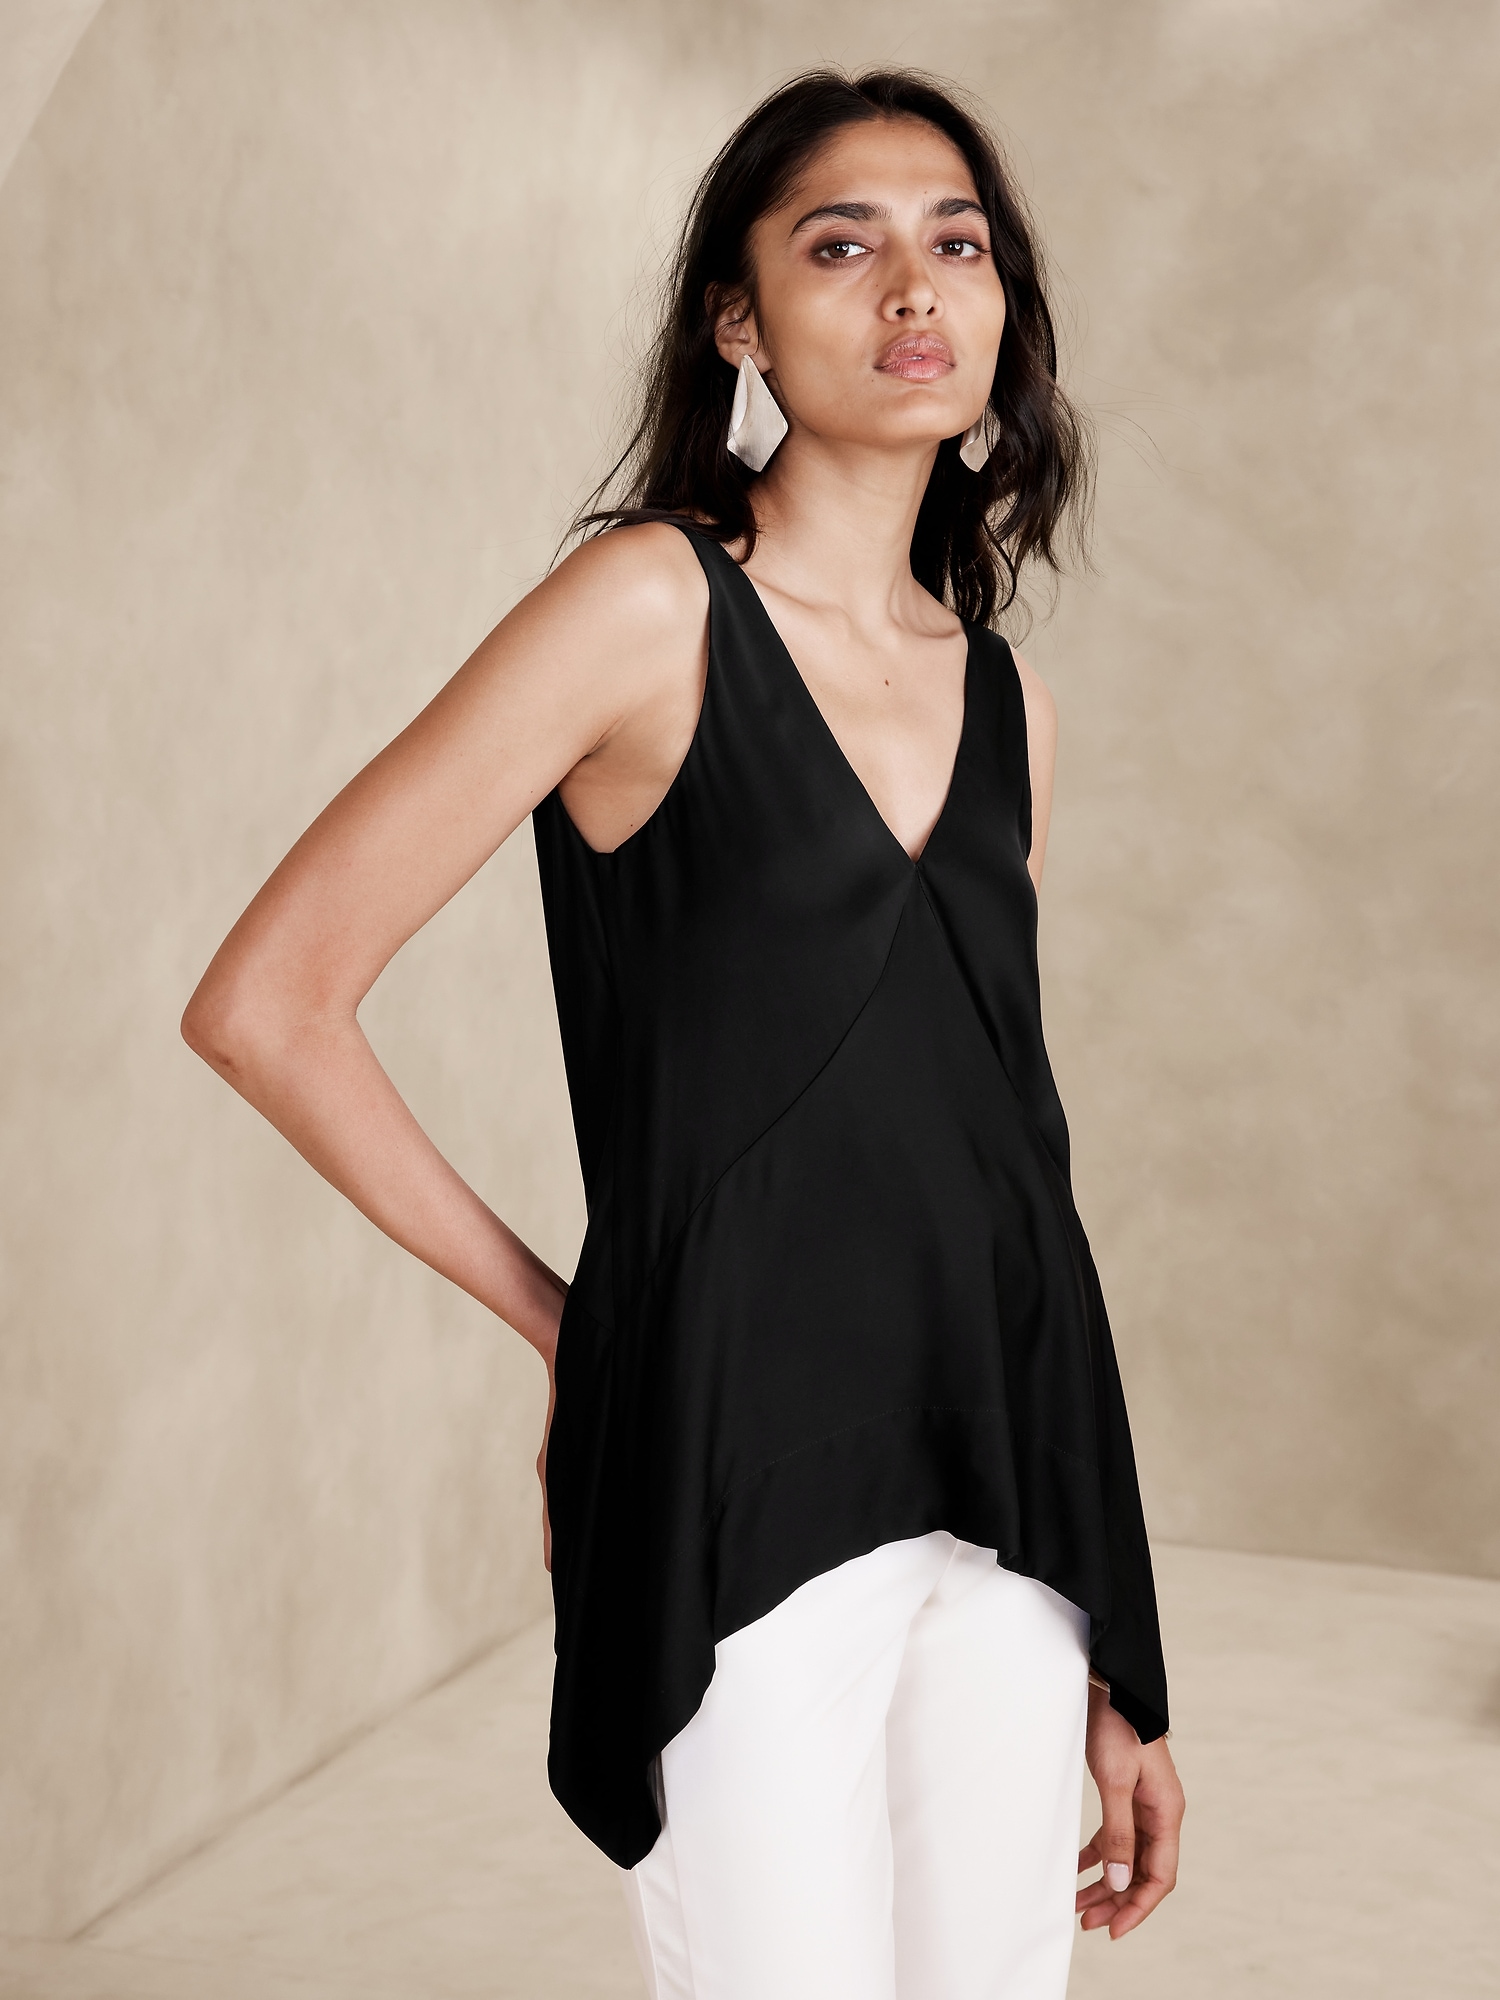 Buy Banana Republic Loire Square-Neck Camisole from the Gap online shop